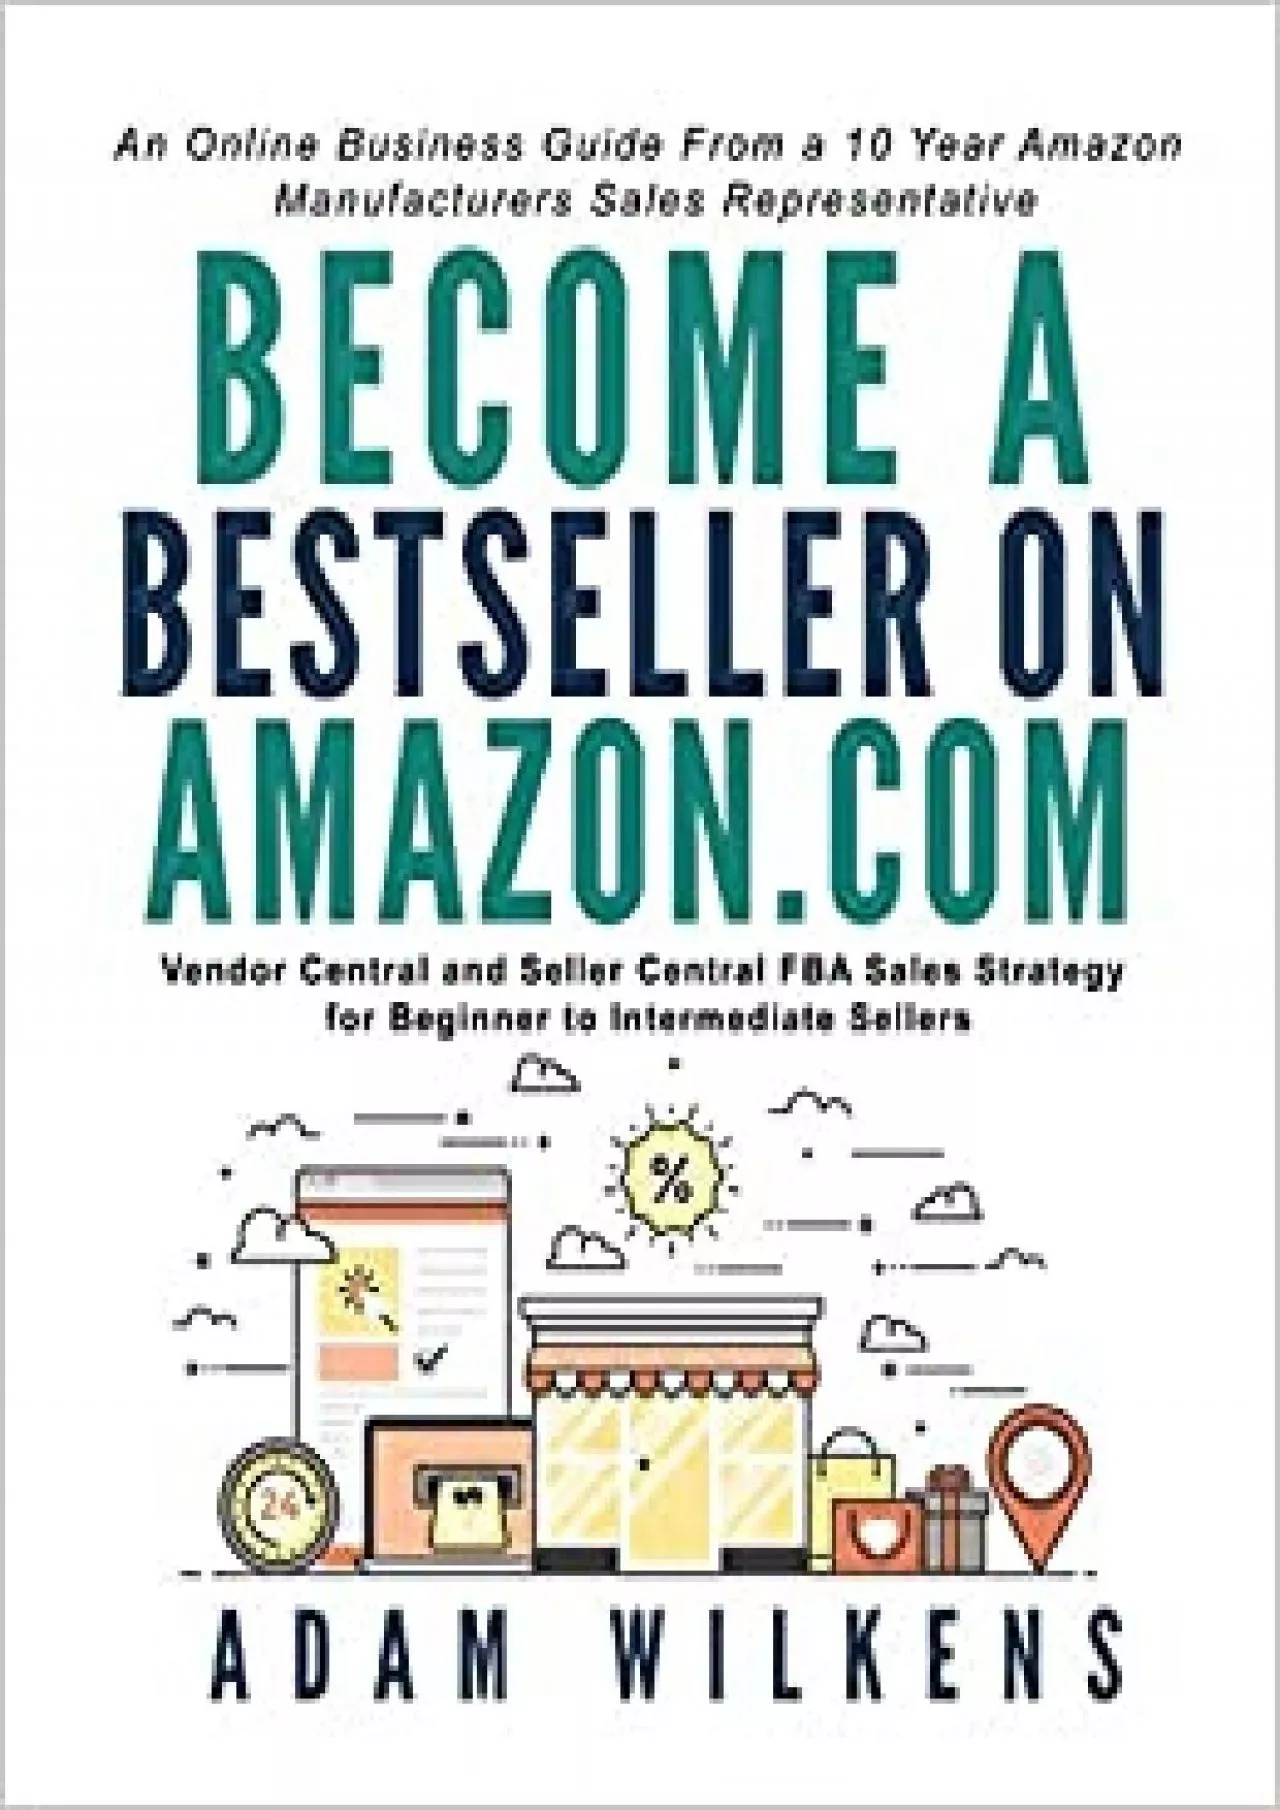 Become a Bestseller on Amazon.com Vendor Central and Seller Central FBA Sales Strategy